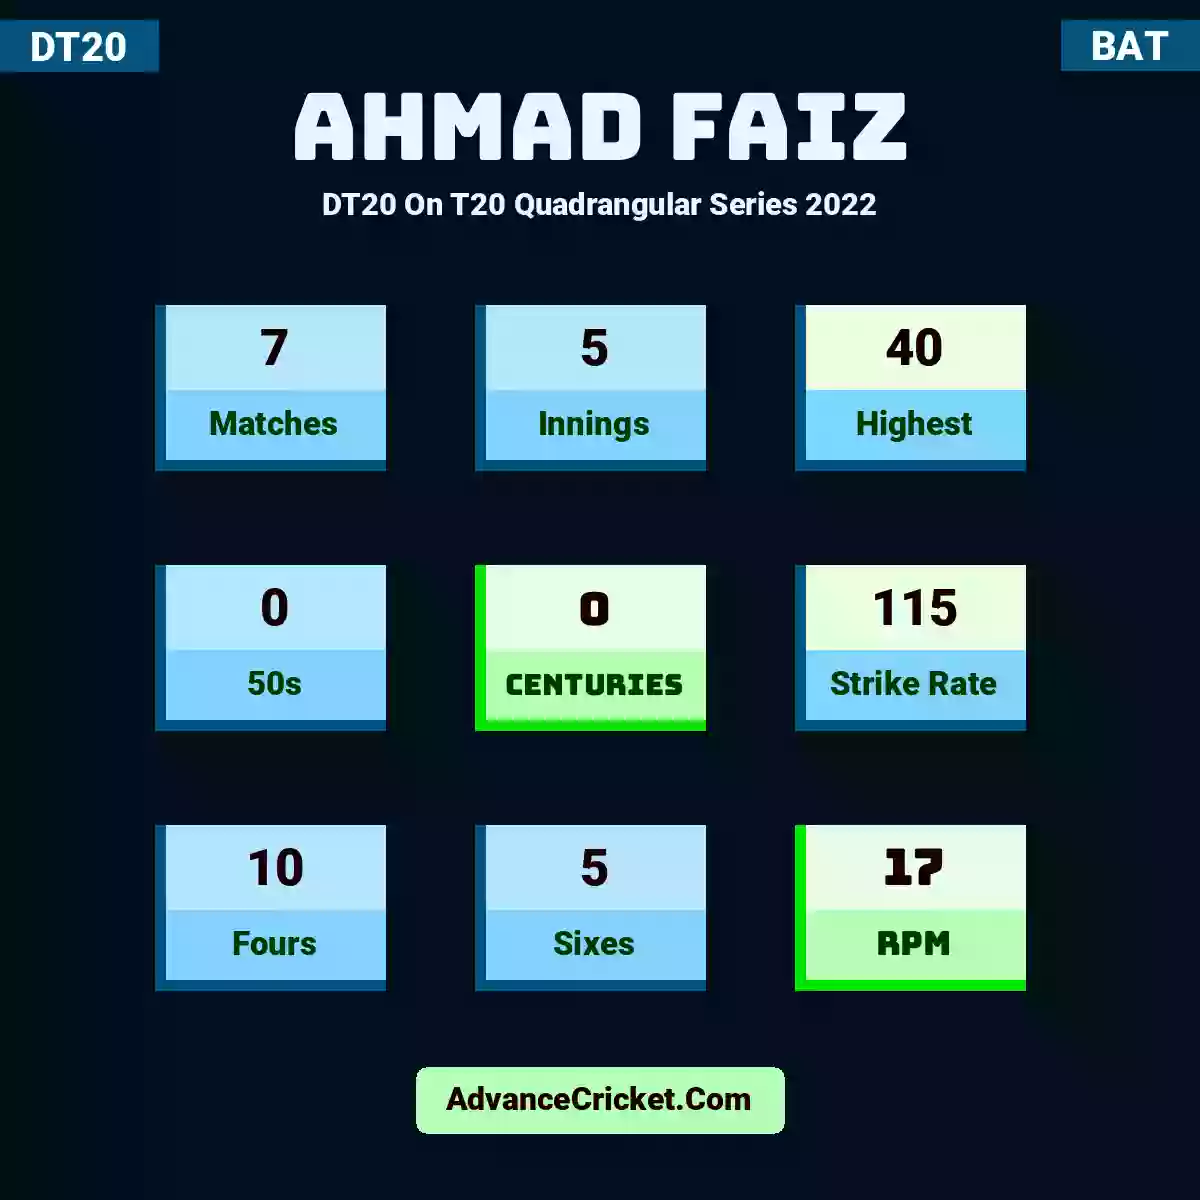 Ahmad Faiz DT20  On T20 Quadrangular Series 2022, Ahmad Faiz played 7 matches, scored 40 runs as highest, 0 half-centuries, and 0 centuries, with a strike rate of 115. A.Faiz hit 10 fours and 5 sixes, with an RPM of 17.